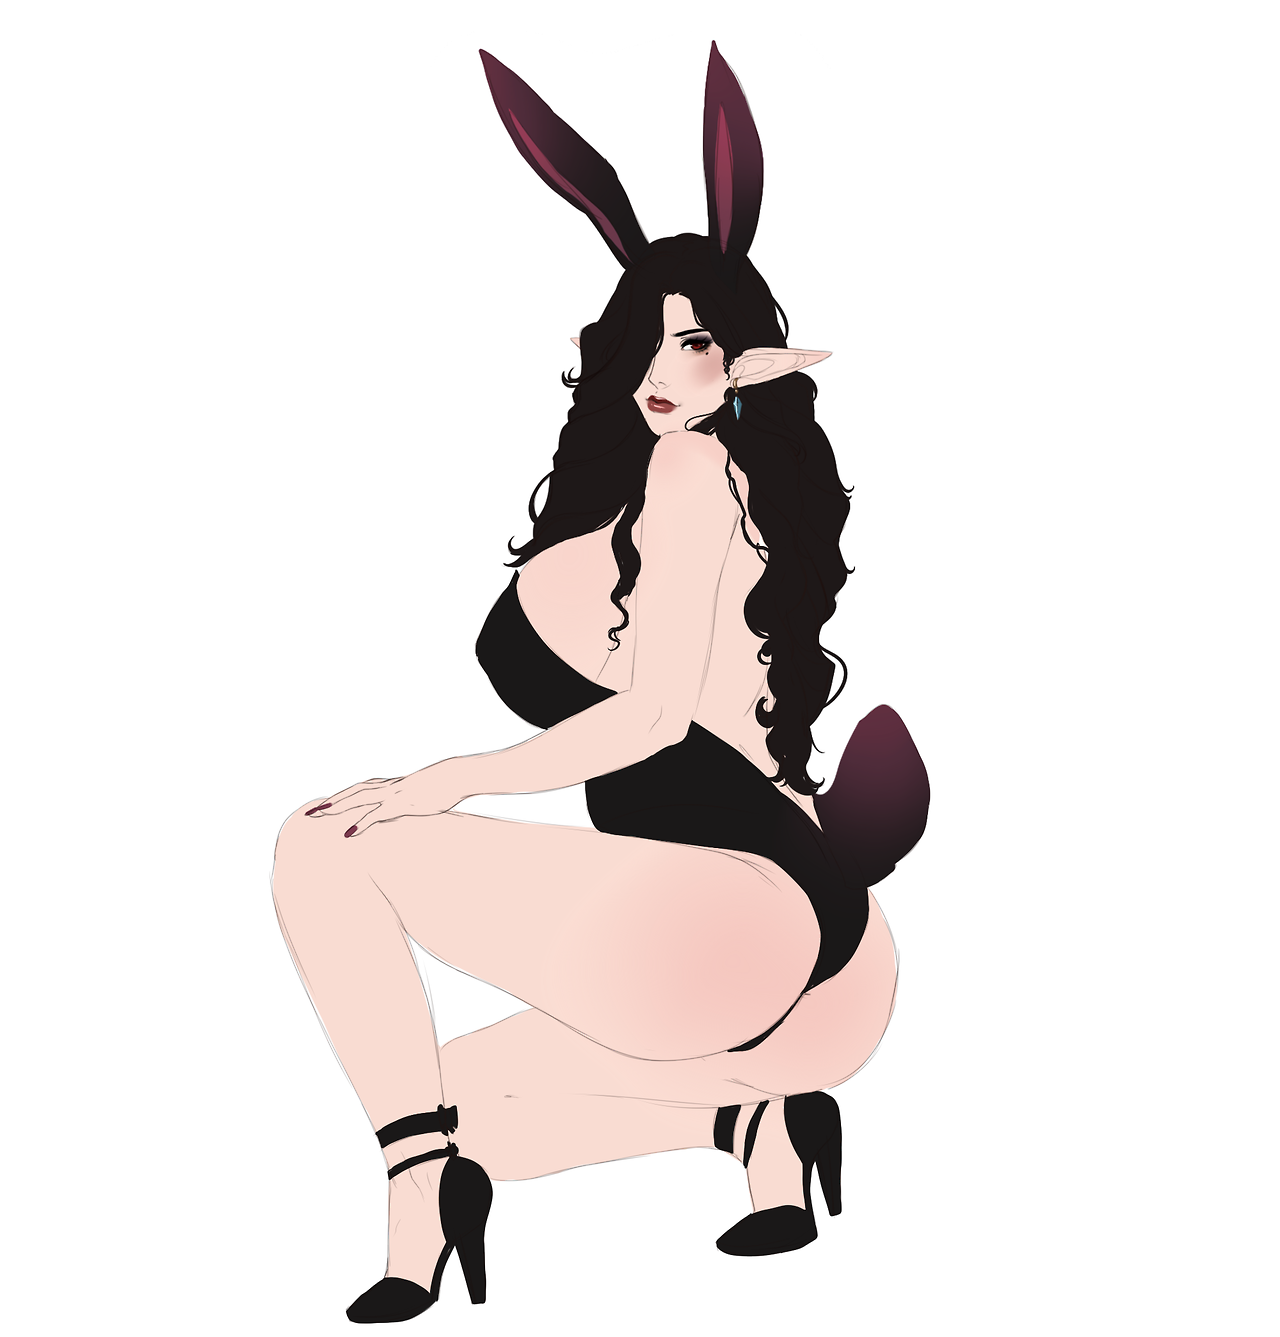 Doodle of my elf babe in a bunny outfit since Easter is right around the corner!